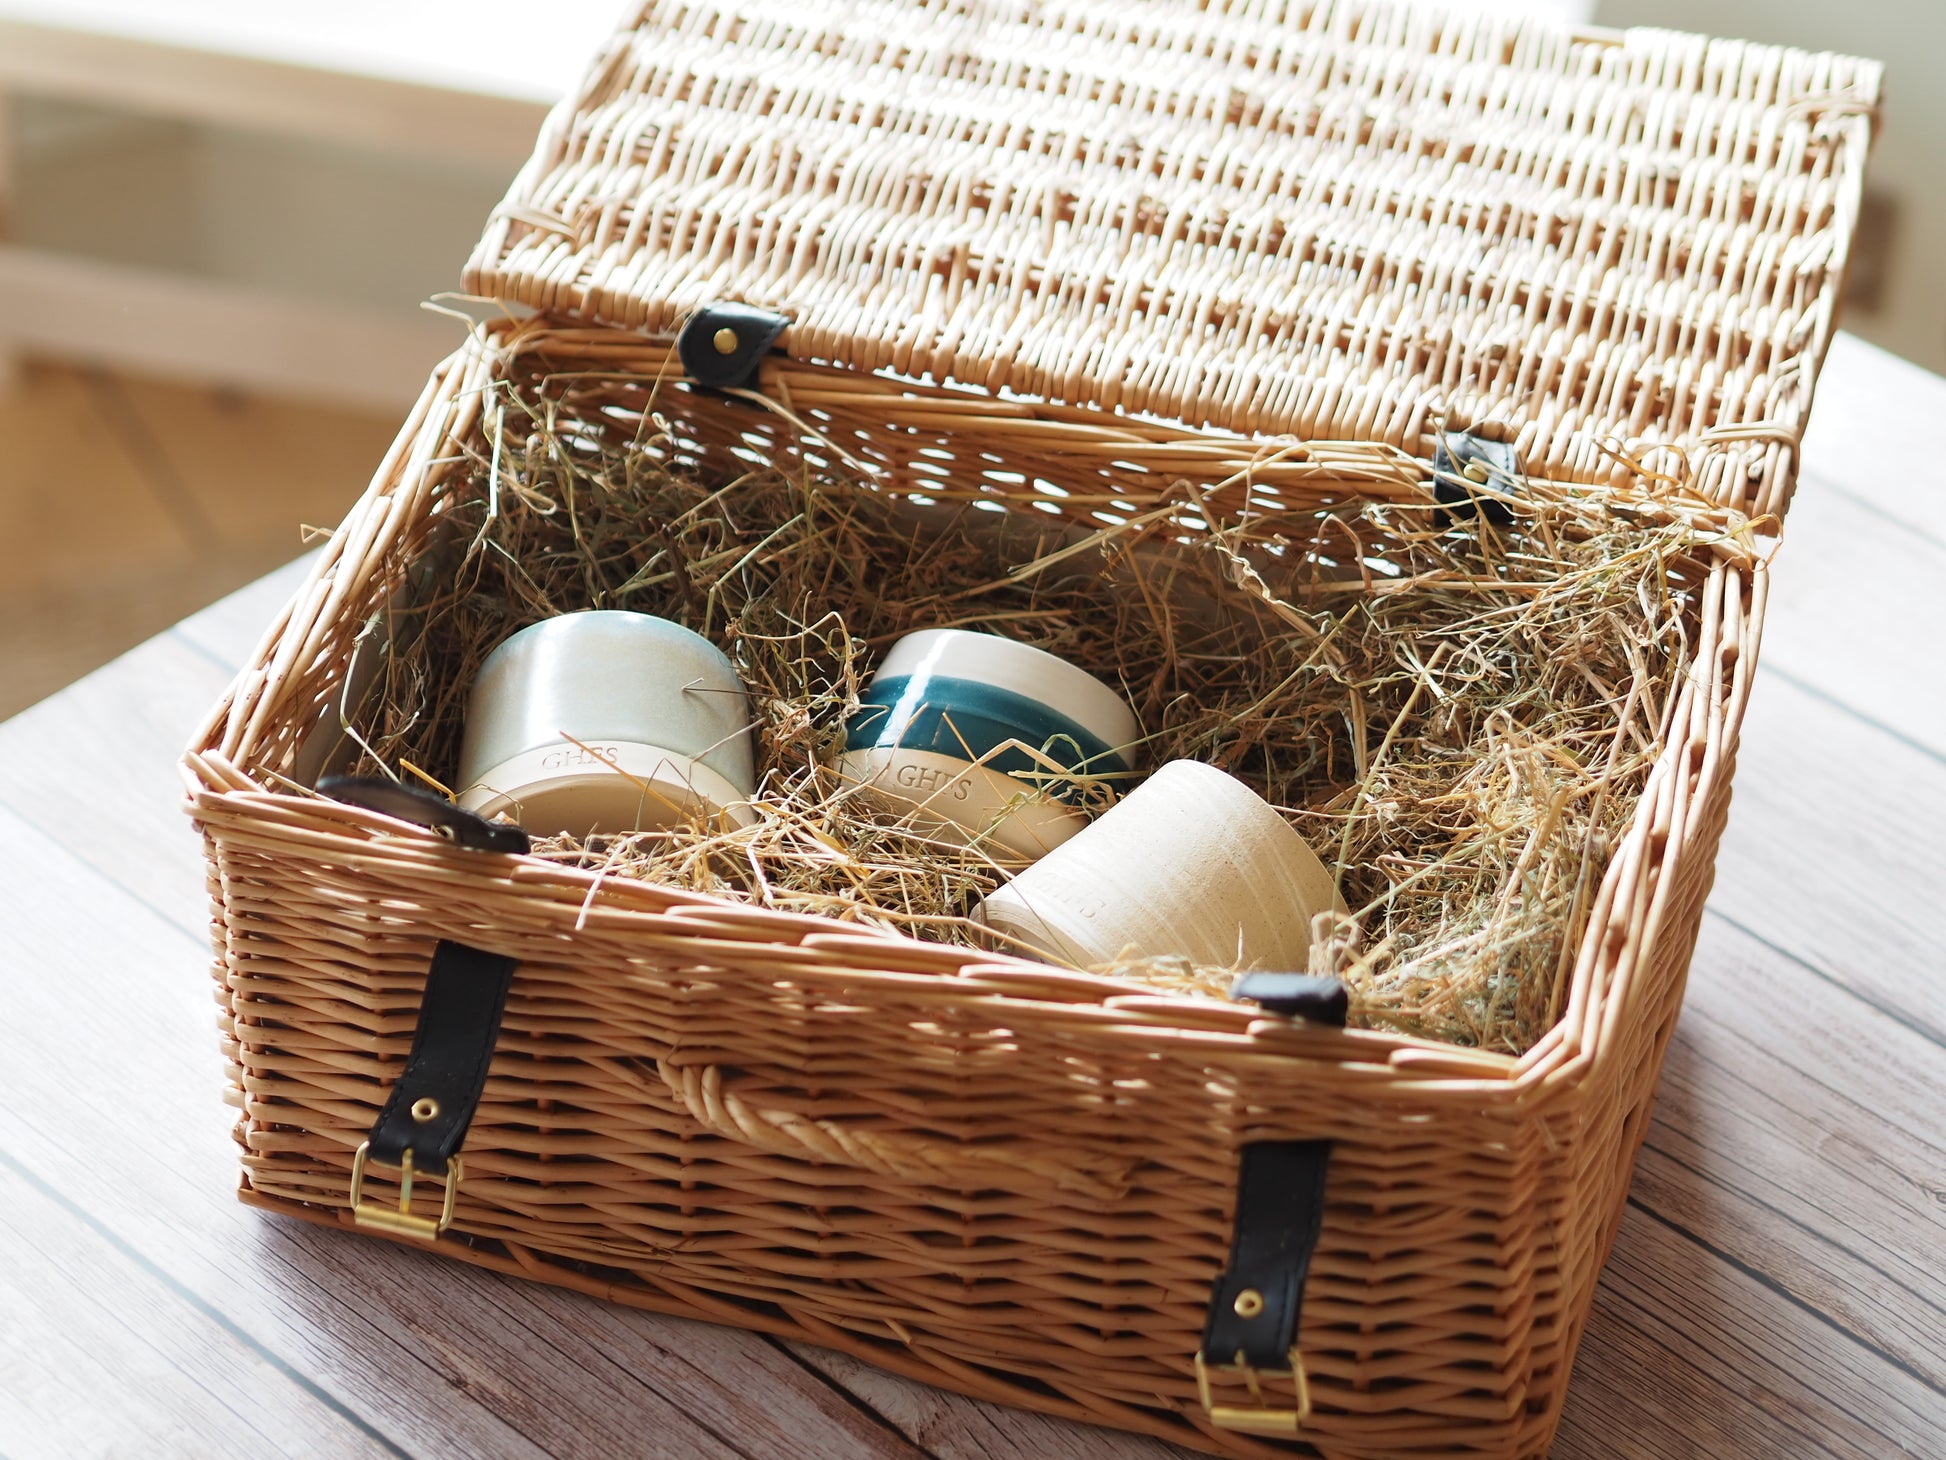 Aromatherapy candles in gift hamper